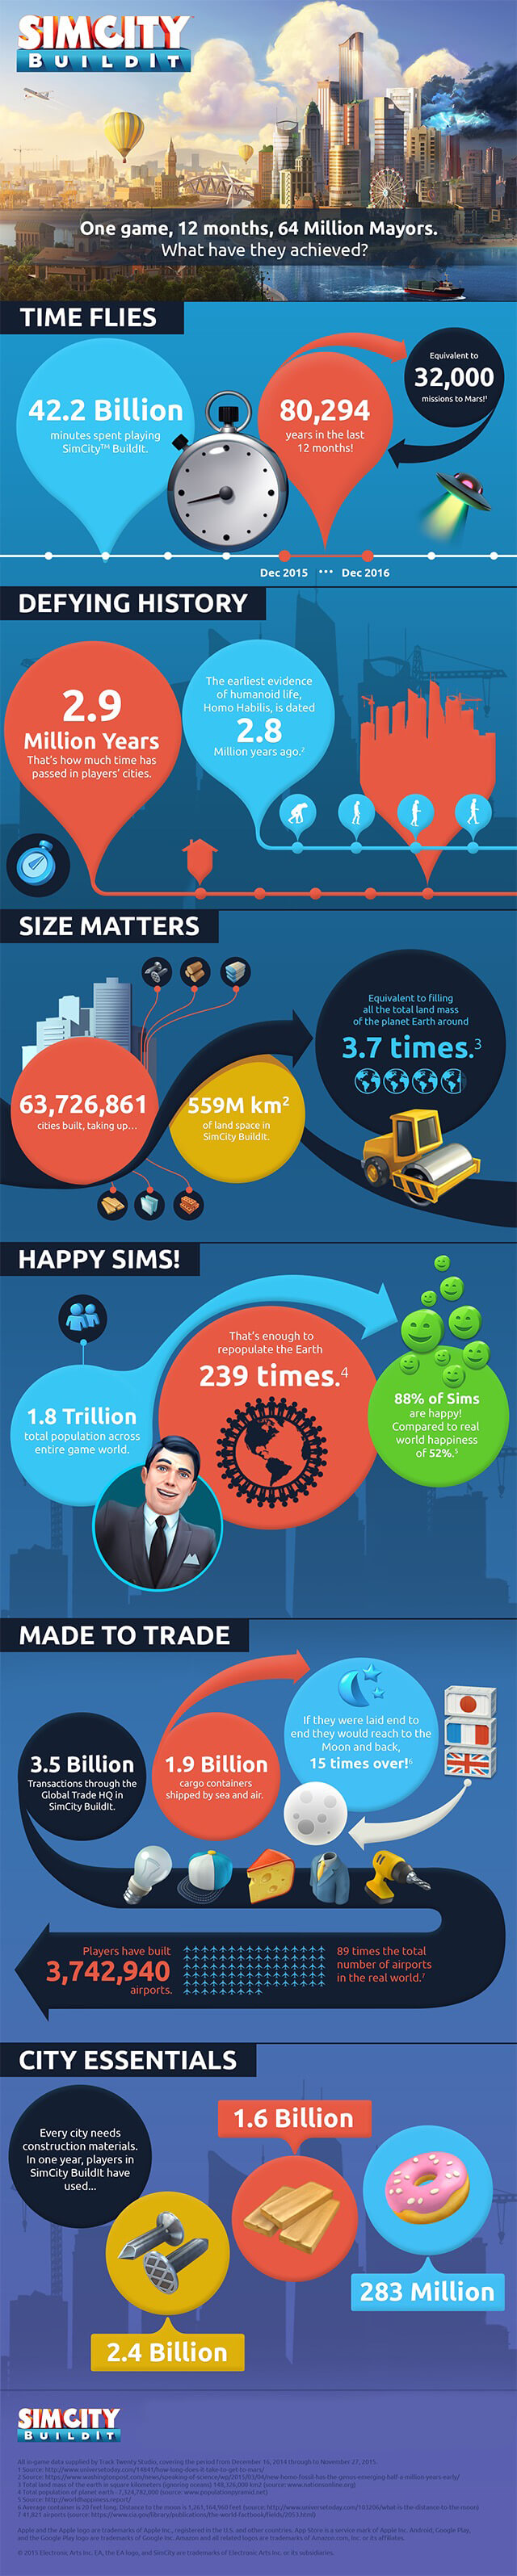 SimCity BuildIt 2015 Infographic